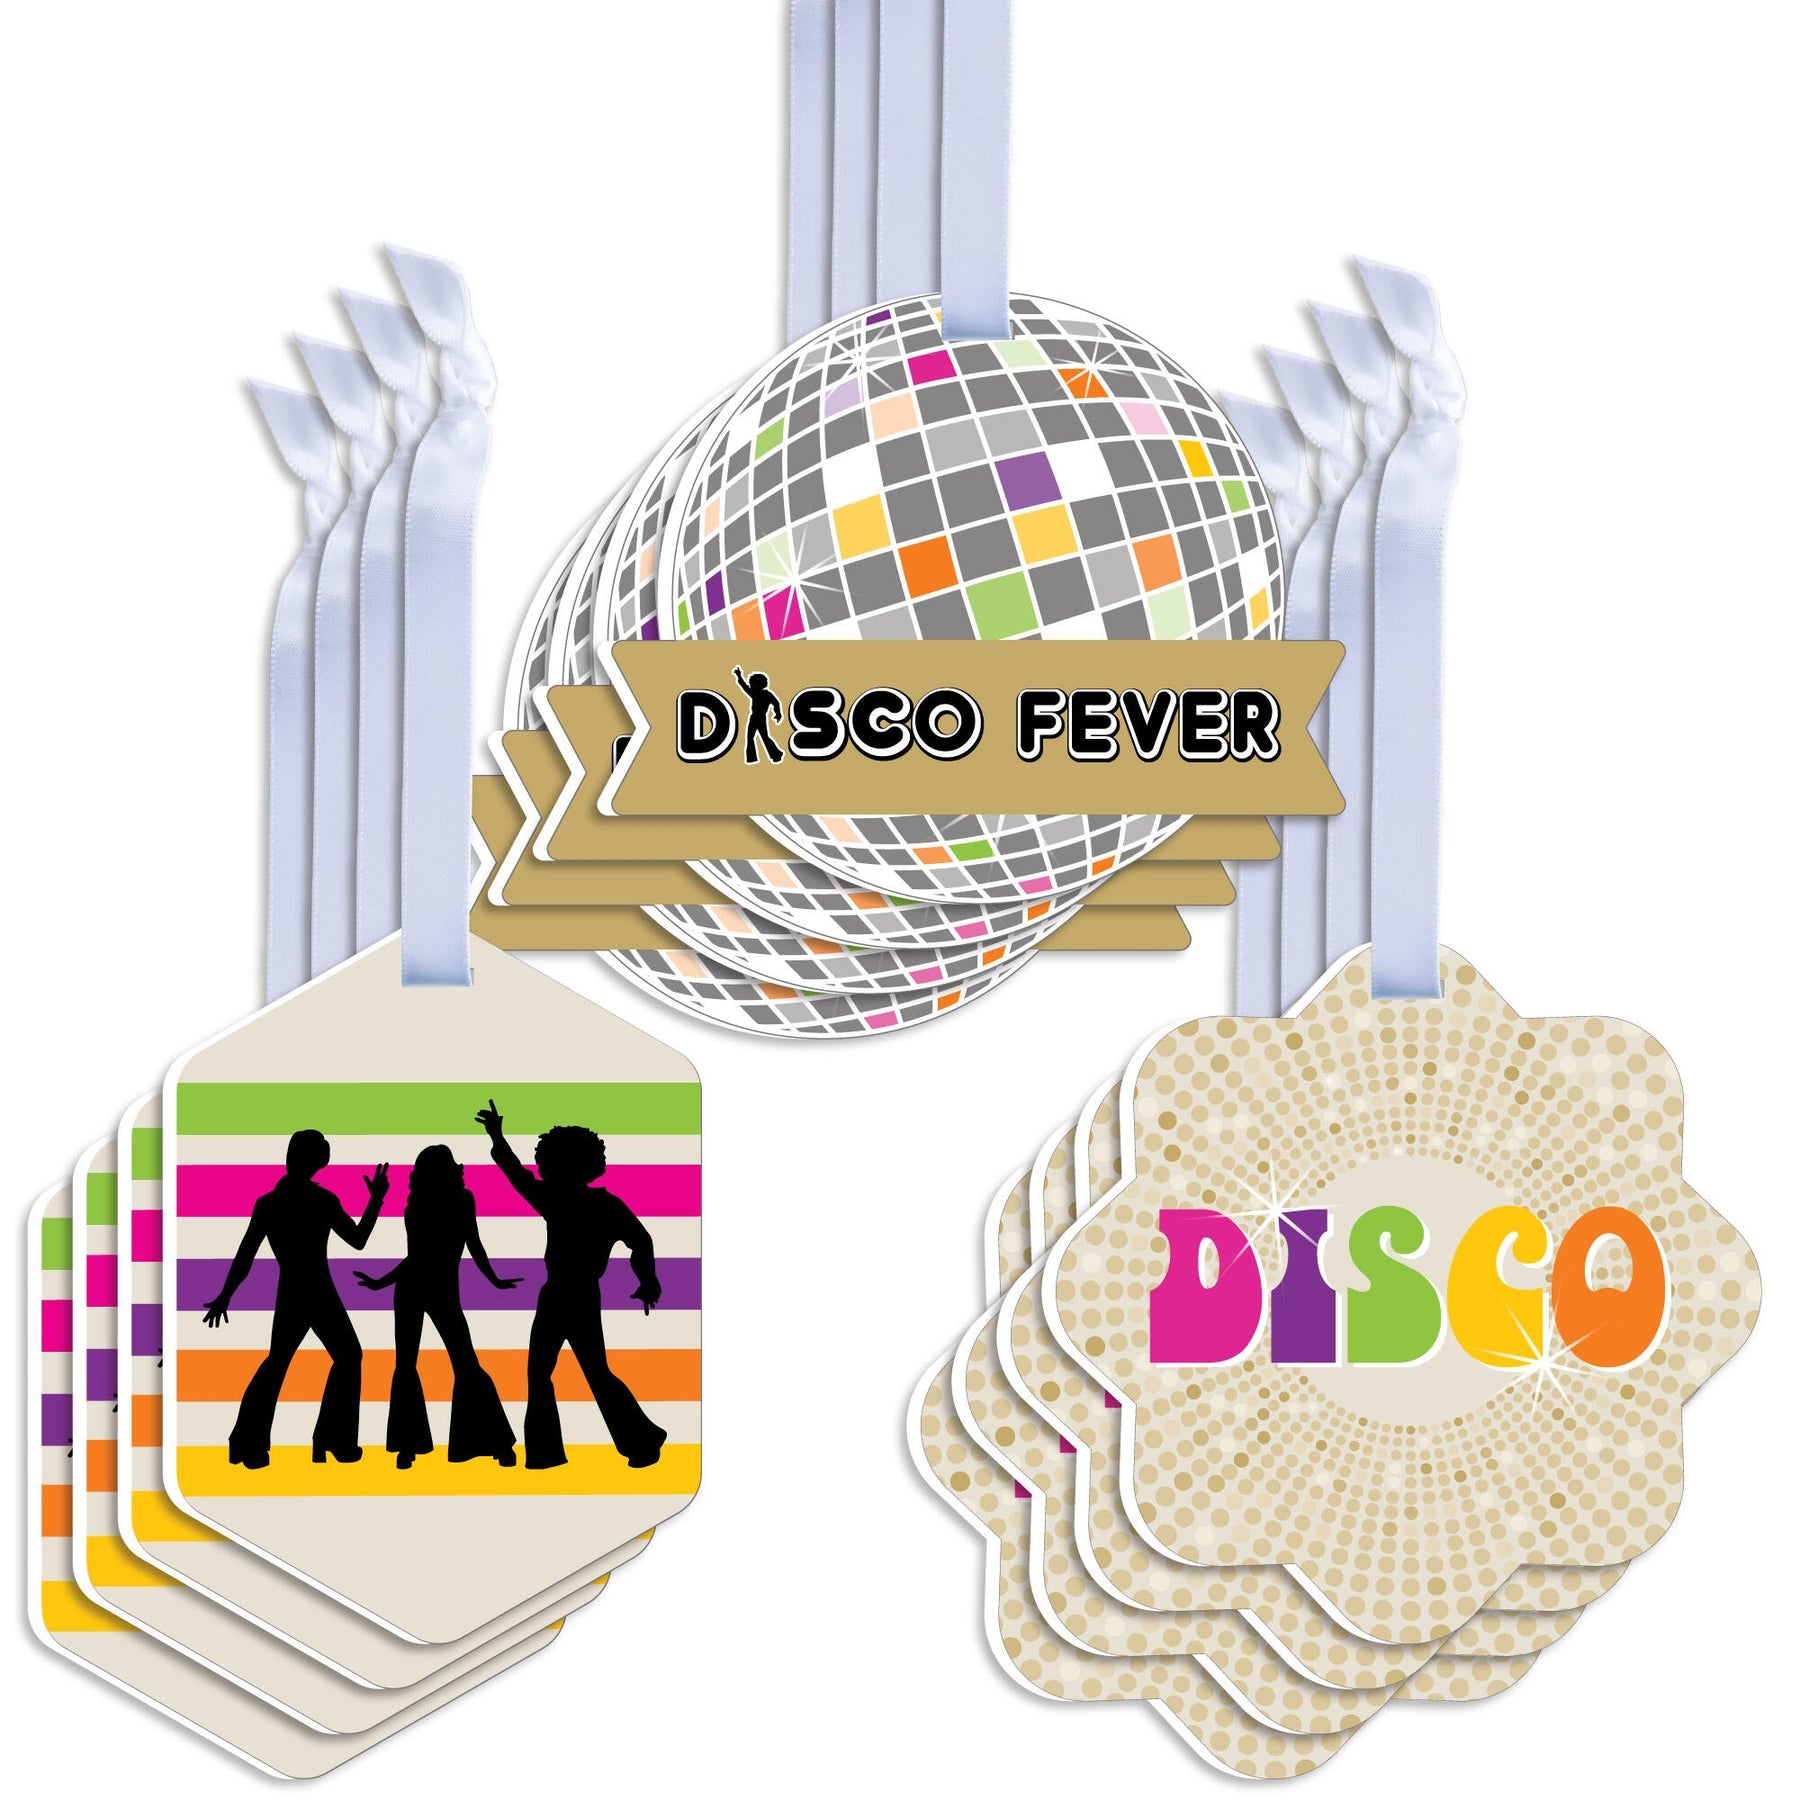 70's Disco - 1970s Disco Fever Party Small Round Candy Stickers